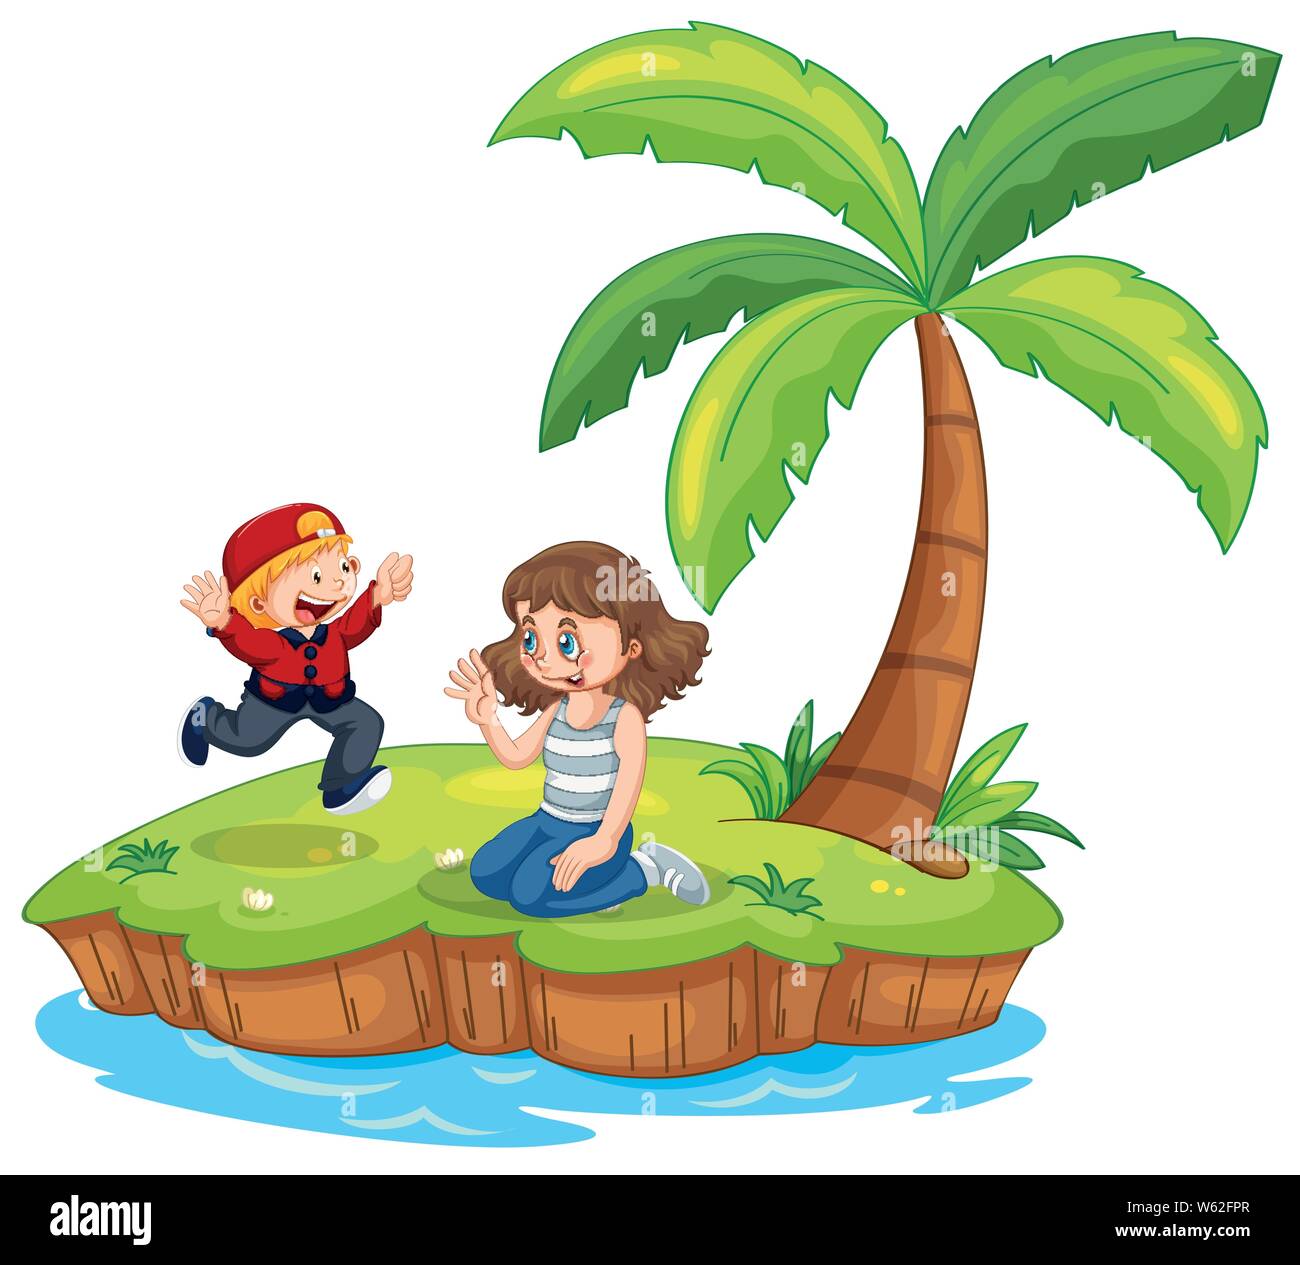 Boy and girl isolated on island illustration Stock Vector